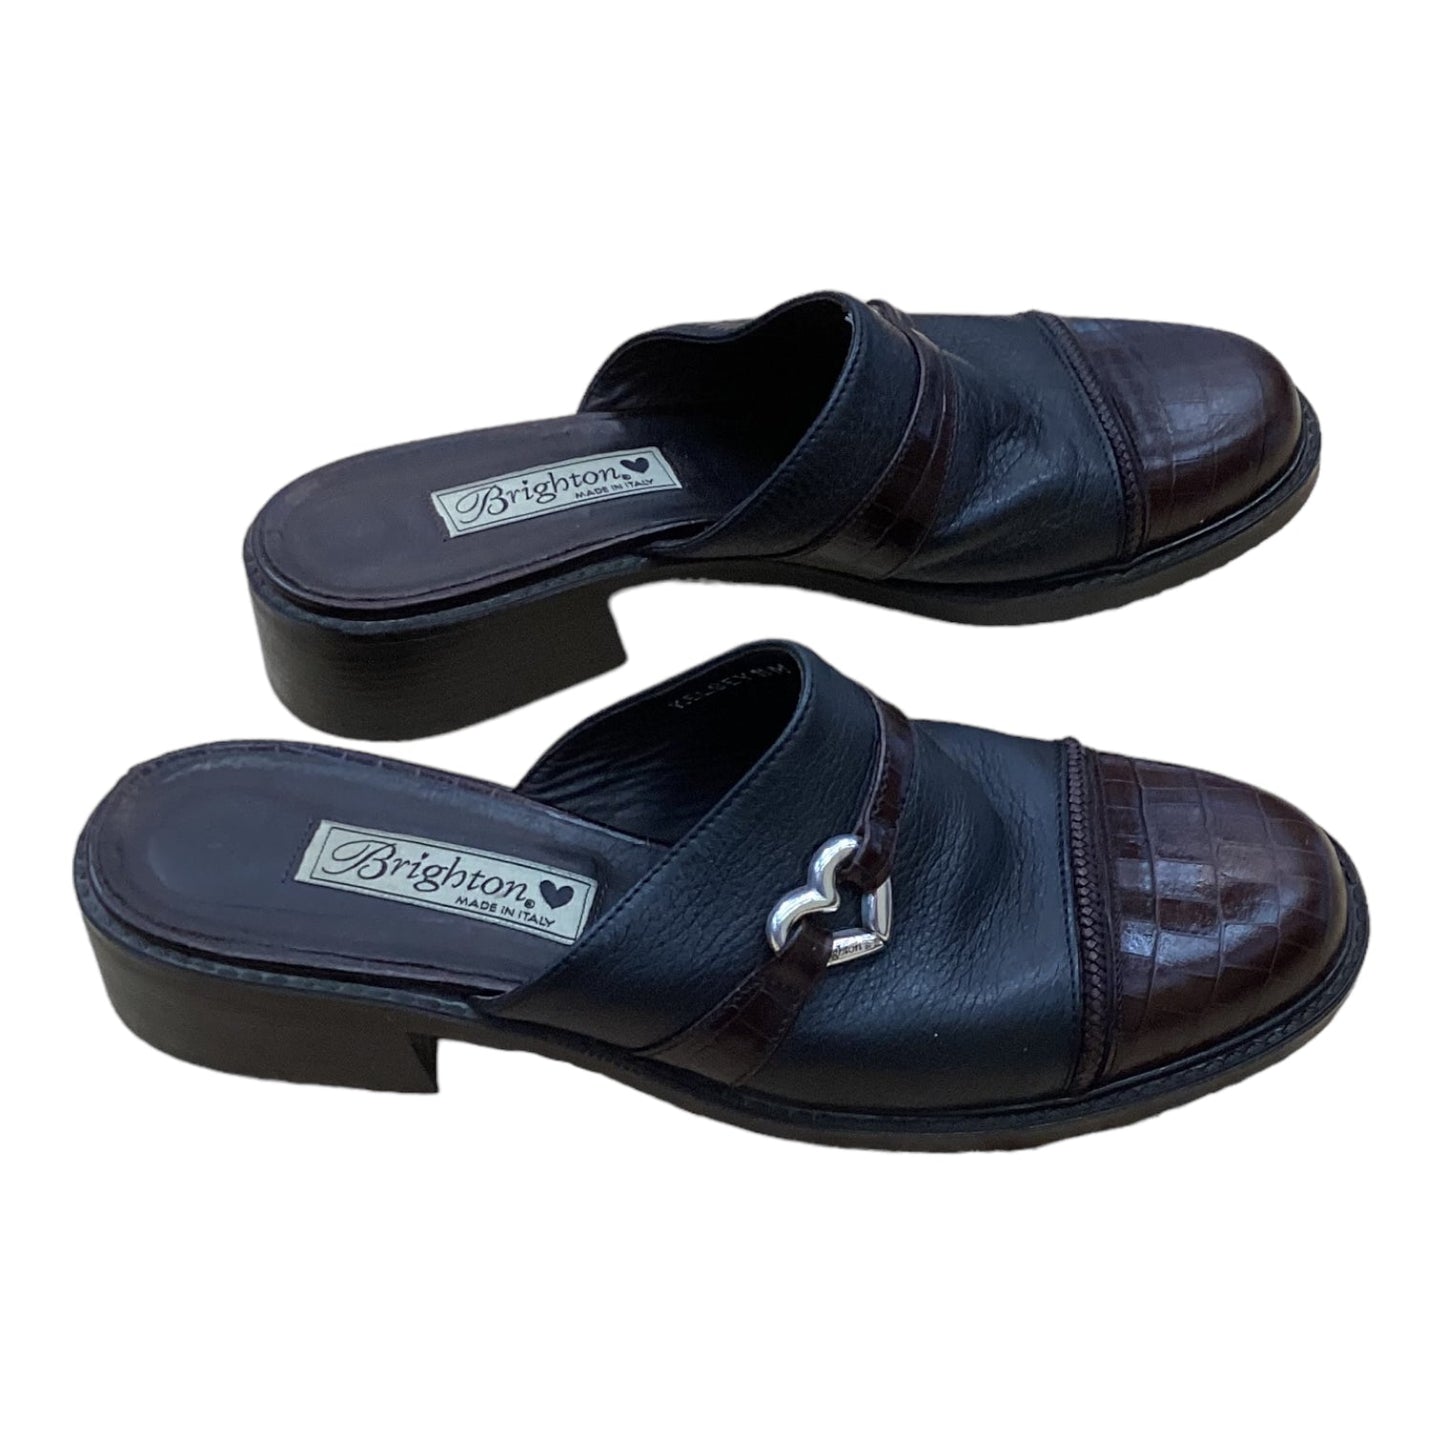 Shoes Flats Loafer Oxford By Brighton  Size: 11